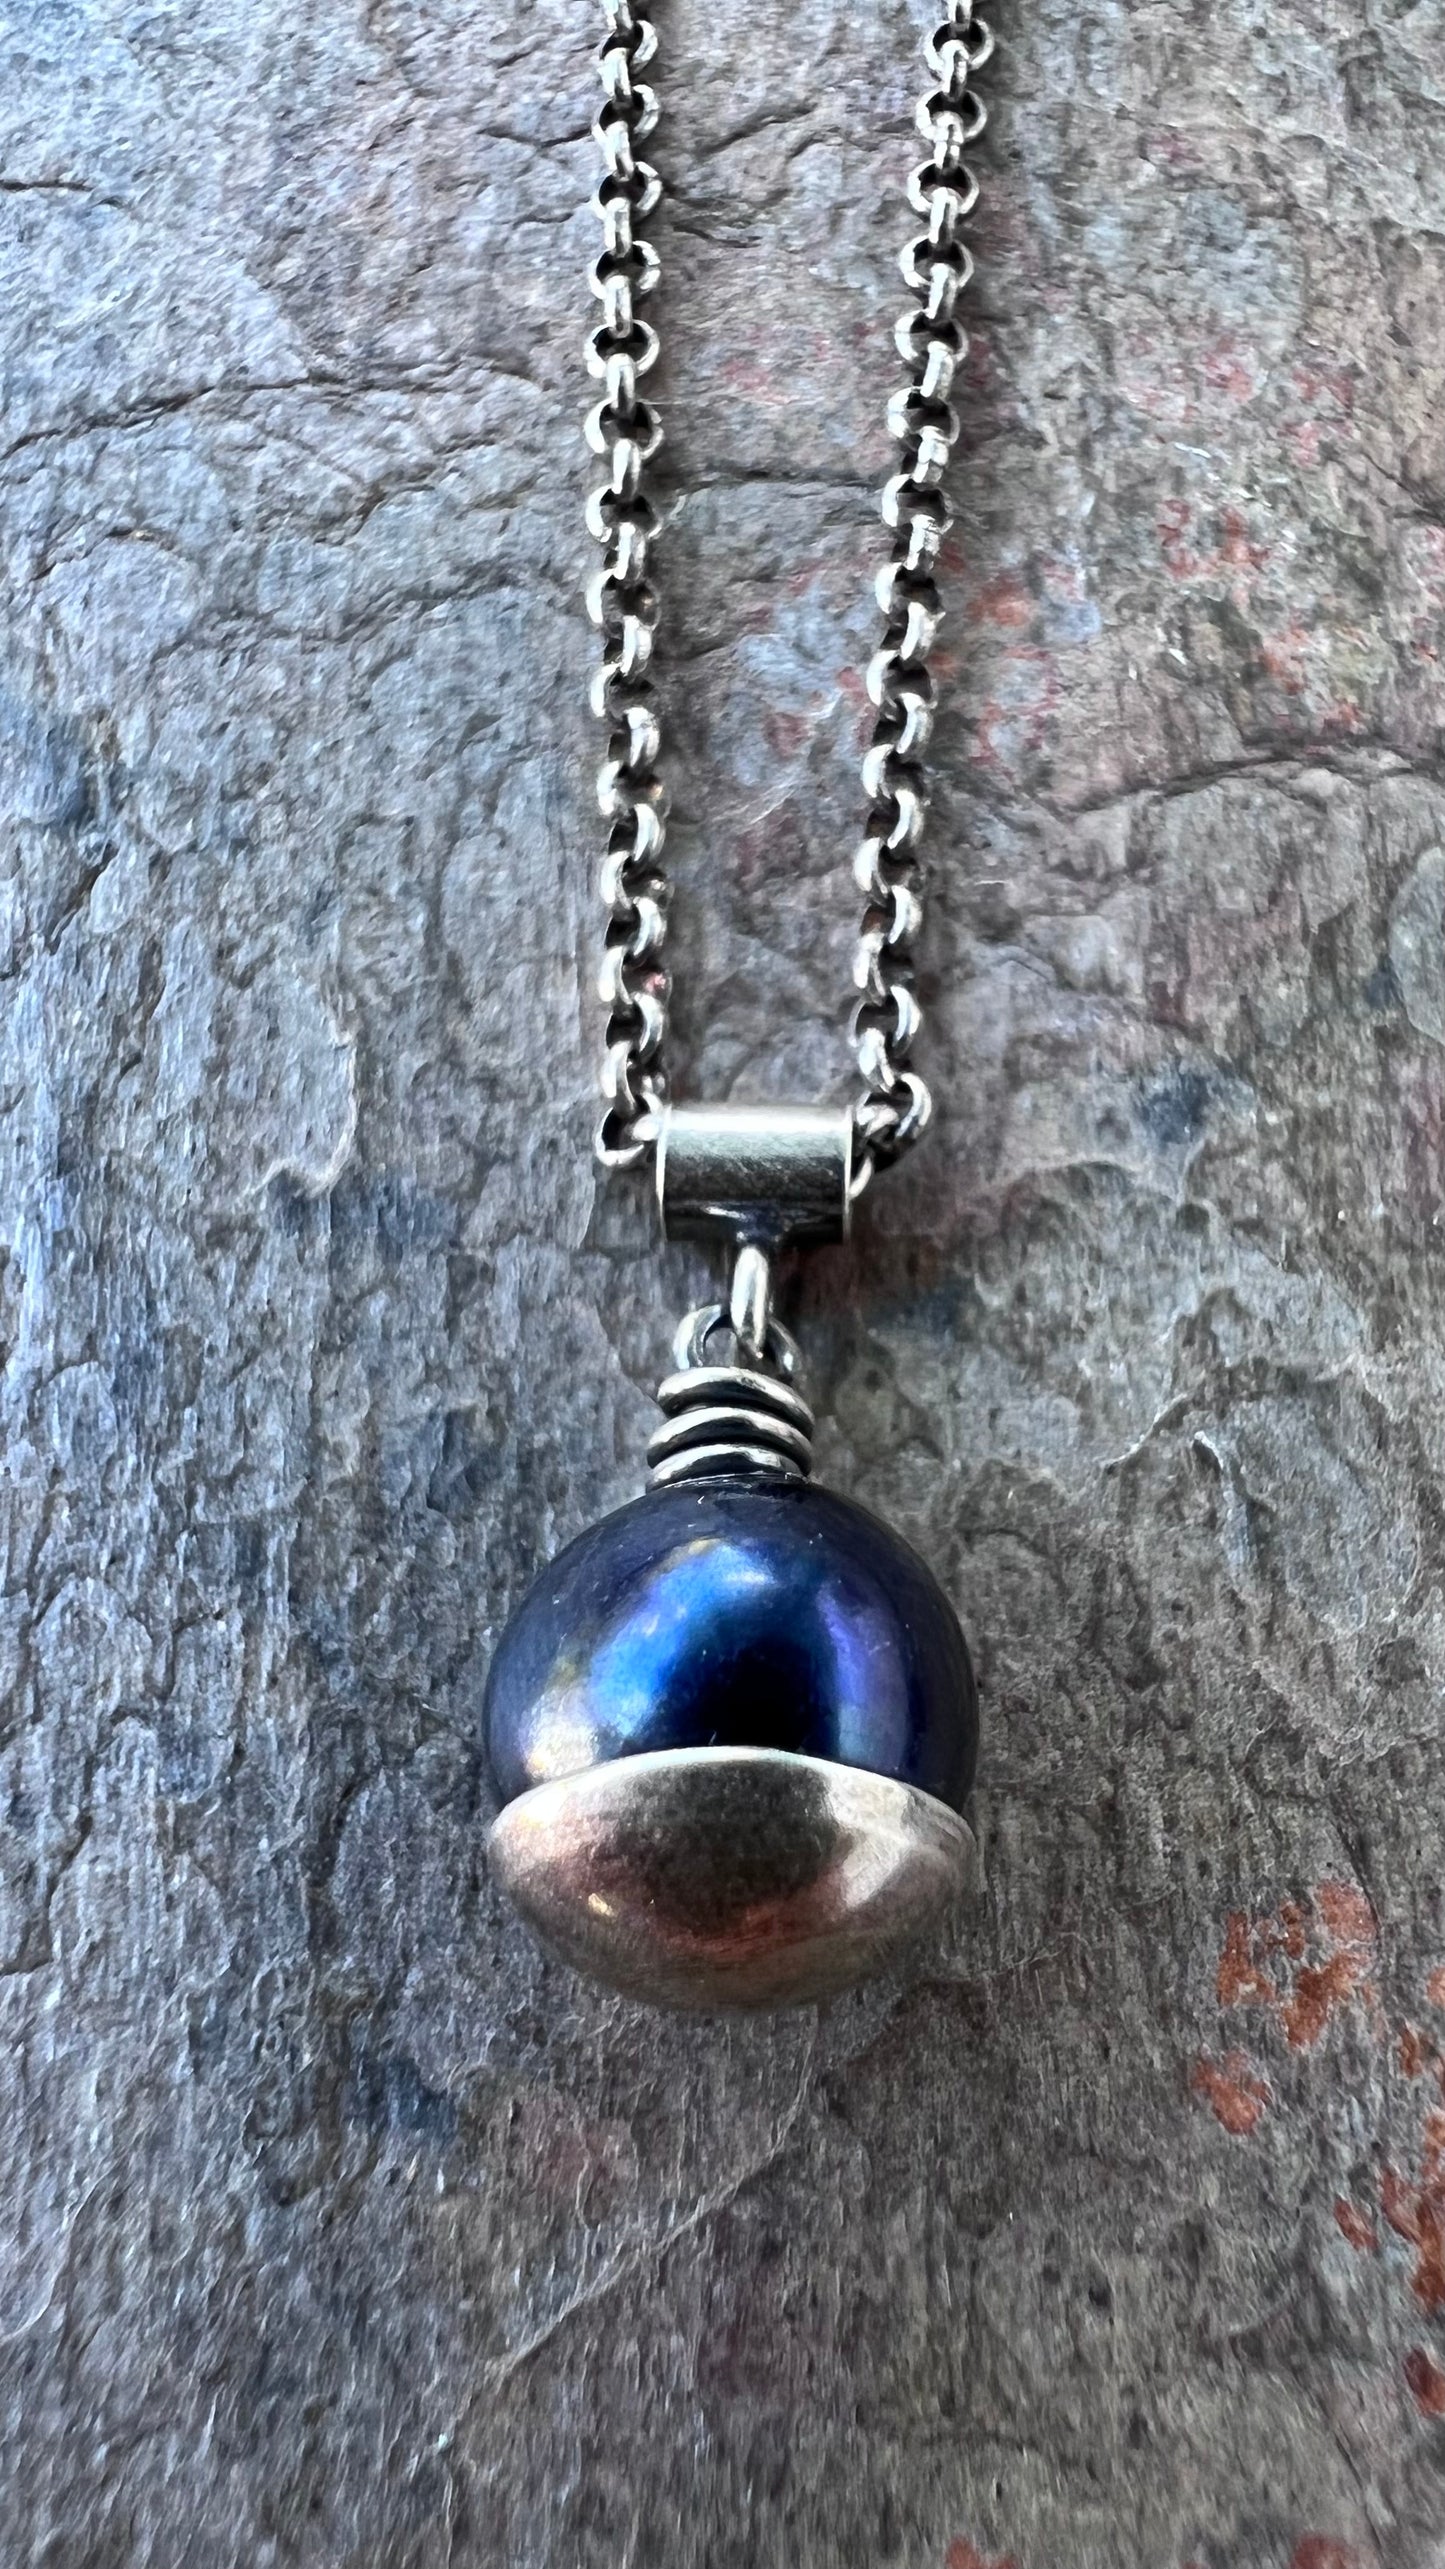 Black Pearl and Sterling Silver Necklace - Genuine Pearl Pendant on Sterling Silver Chain